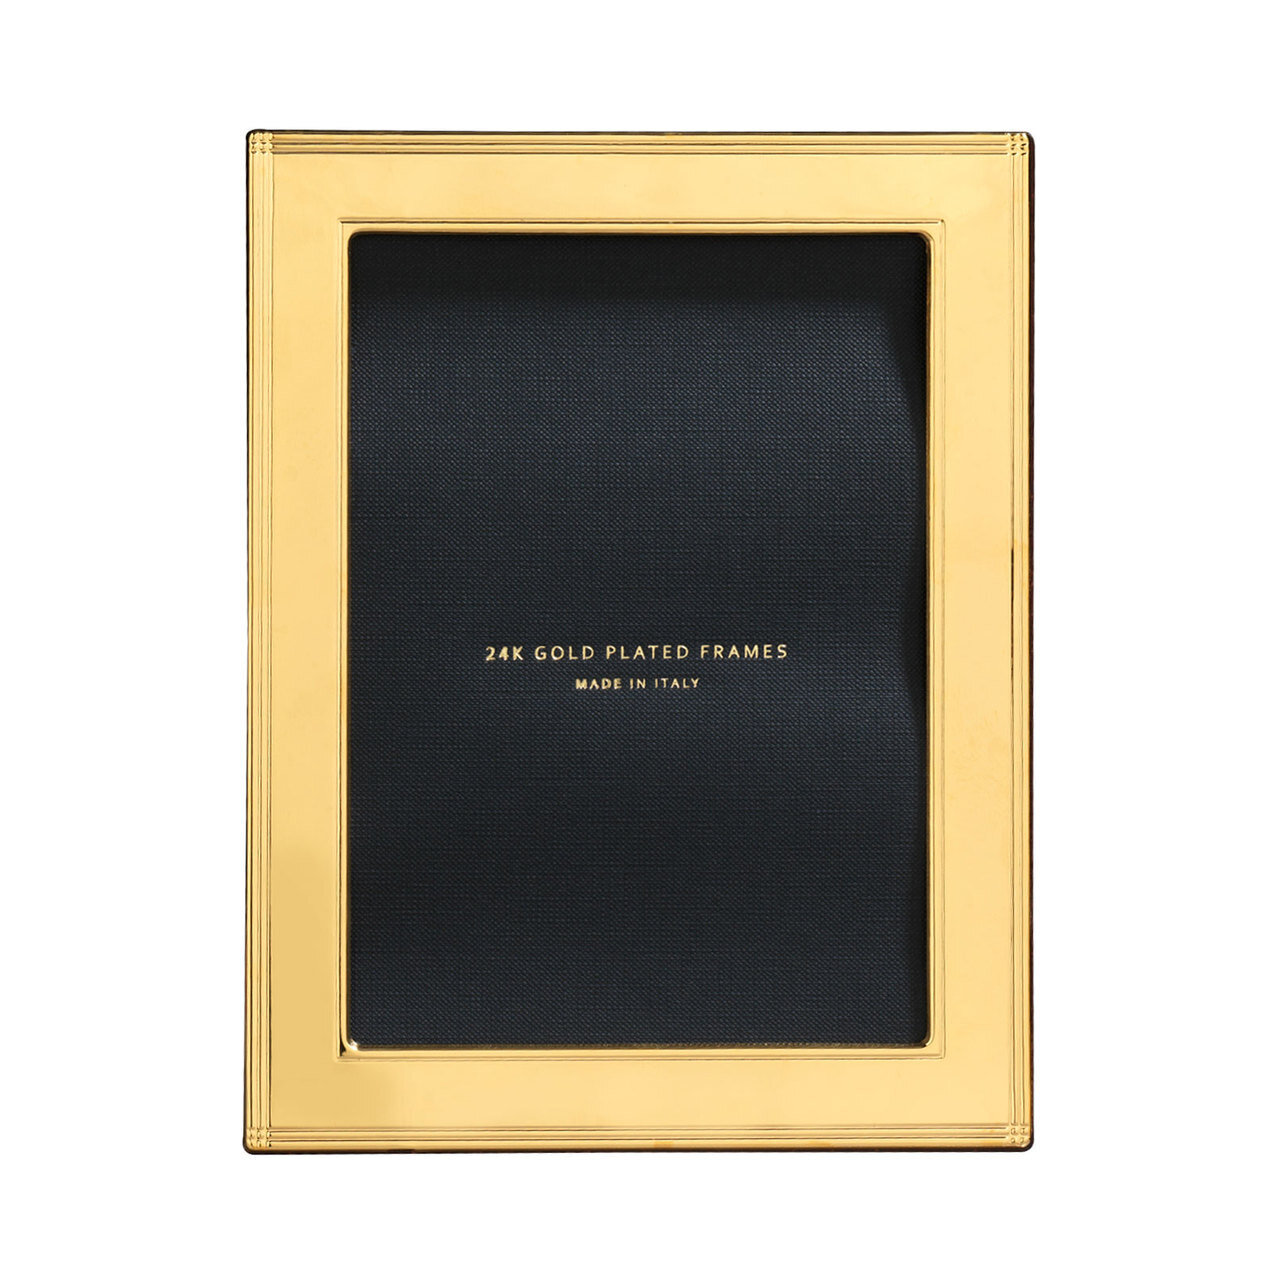 Cunill Madison 8 x 10 Inch Picture Frame - 24k Gold Plated 0.5 Microns